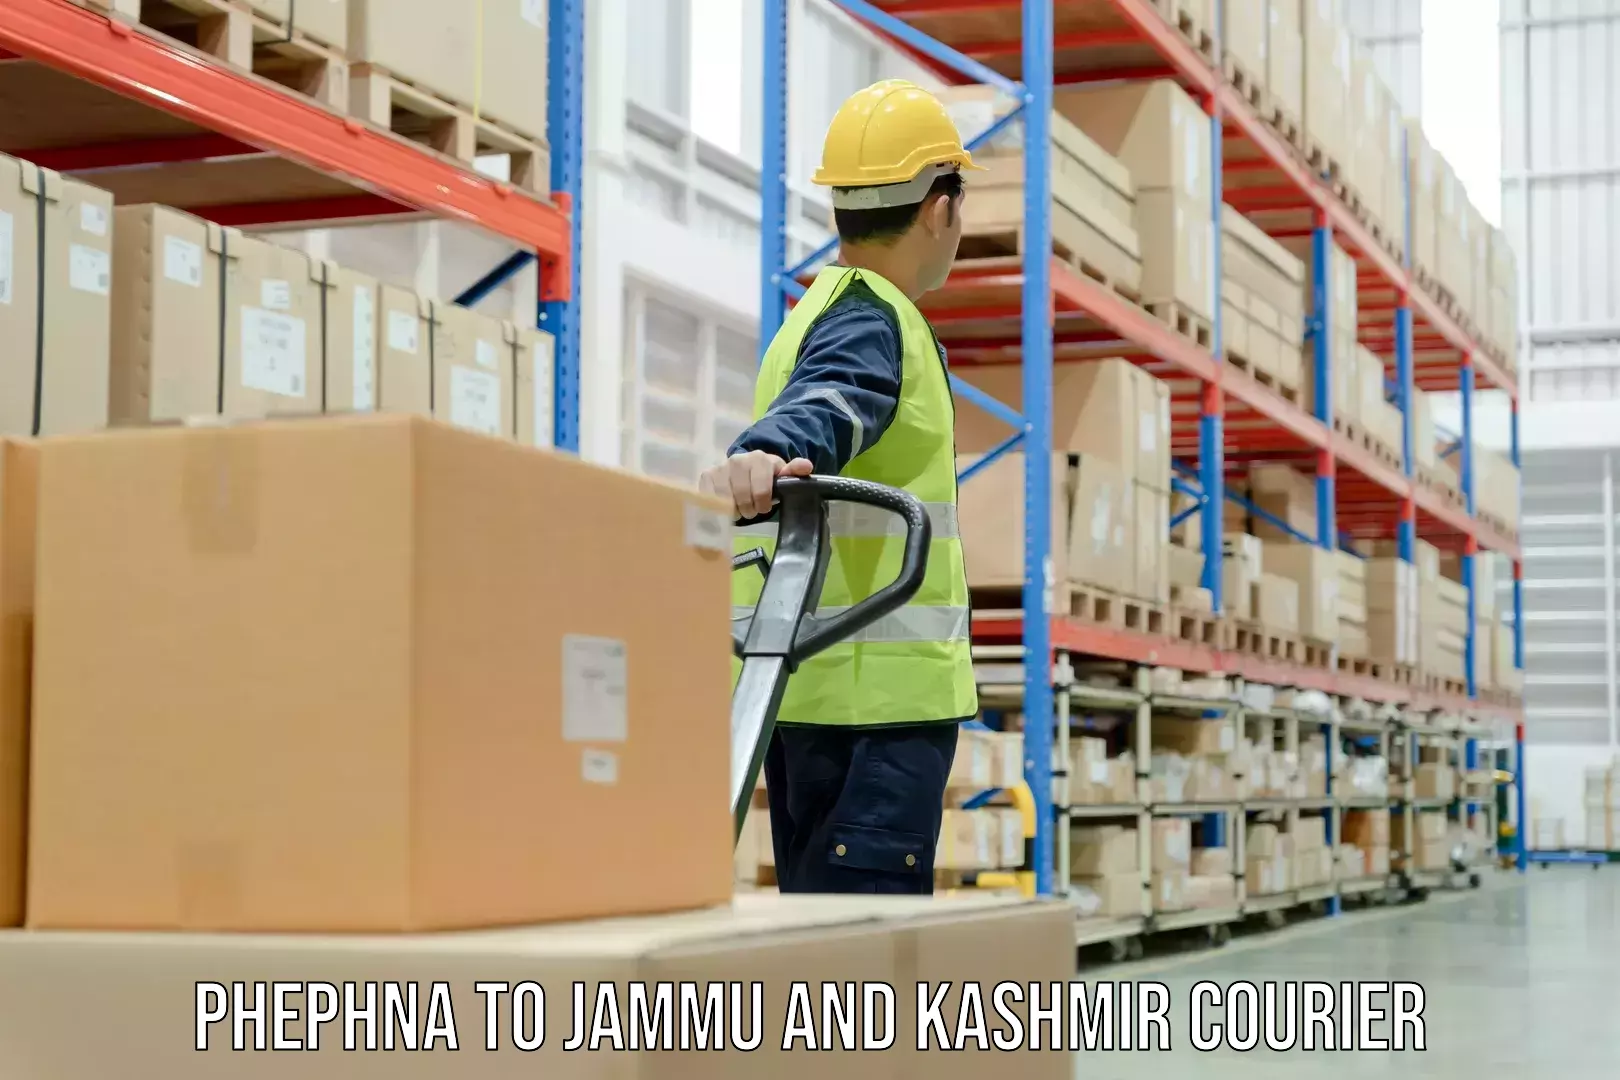 Seamless shipping service Phephna to Jakh